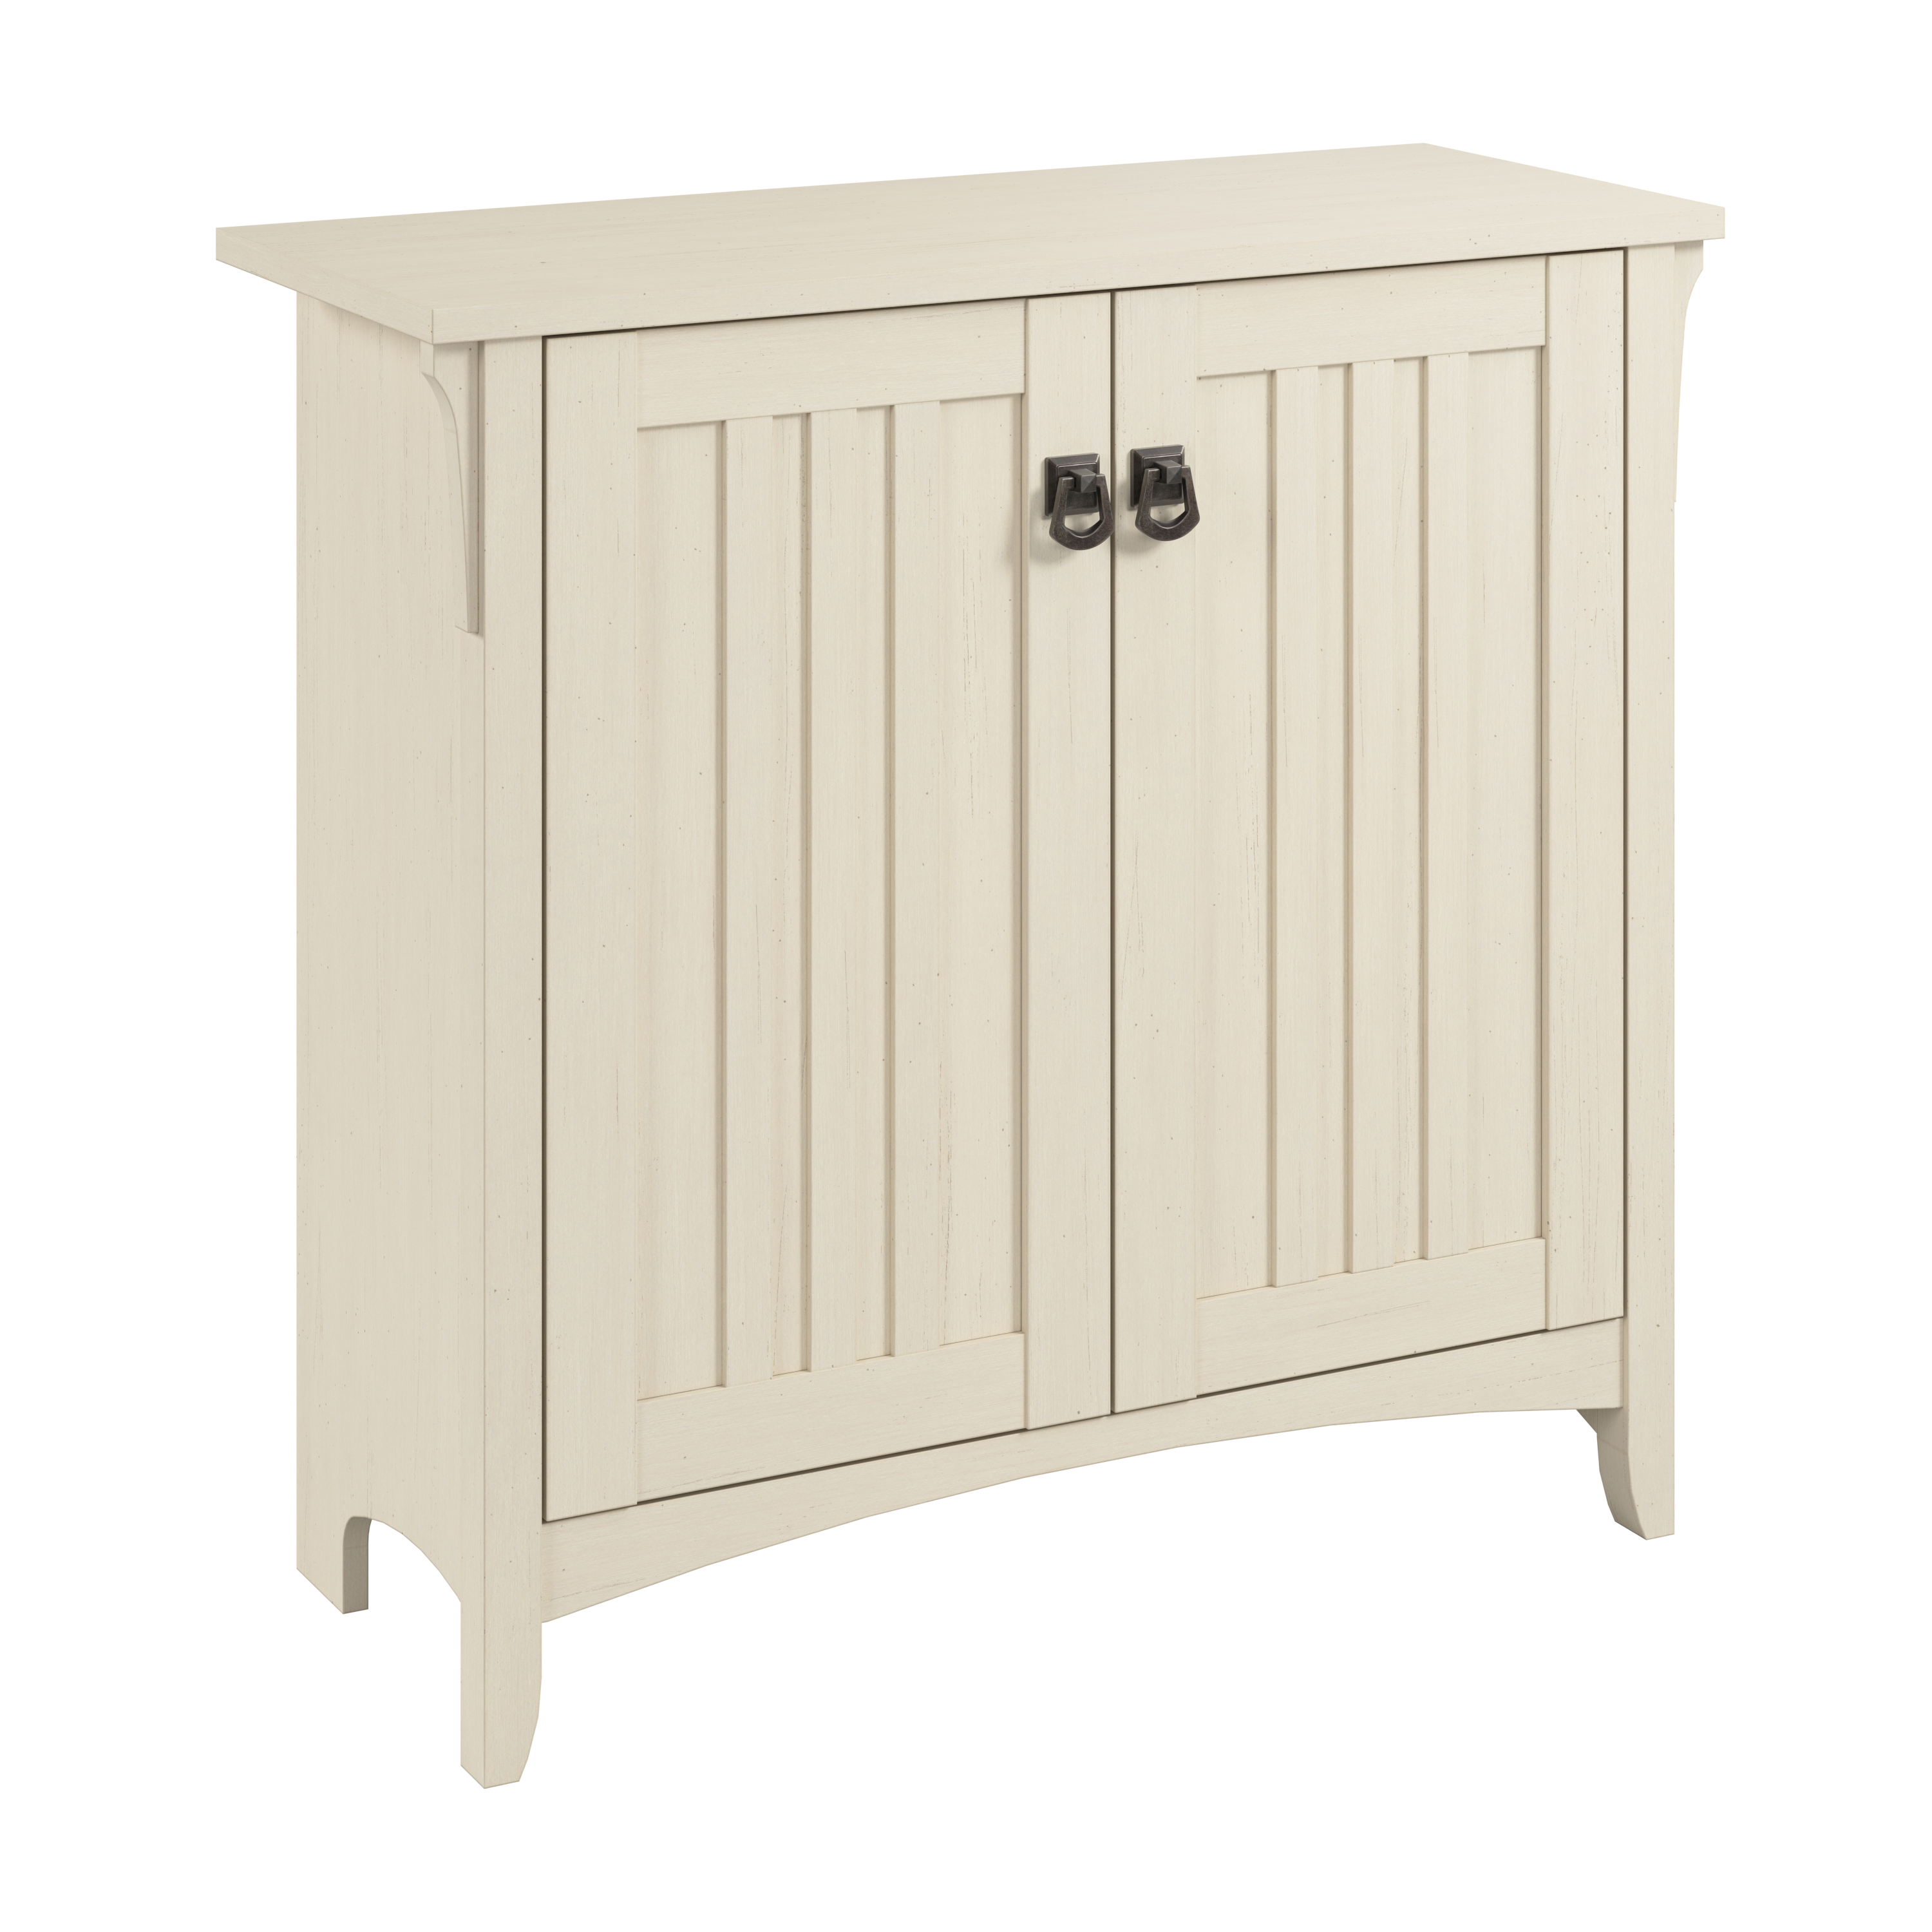 Shop Bush Furniture Salinas Small Storage Cabinet with Doors and Shelves 02 SAS632AW-03 #color_antique white